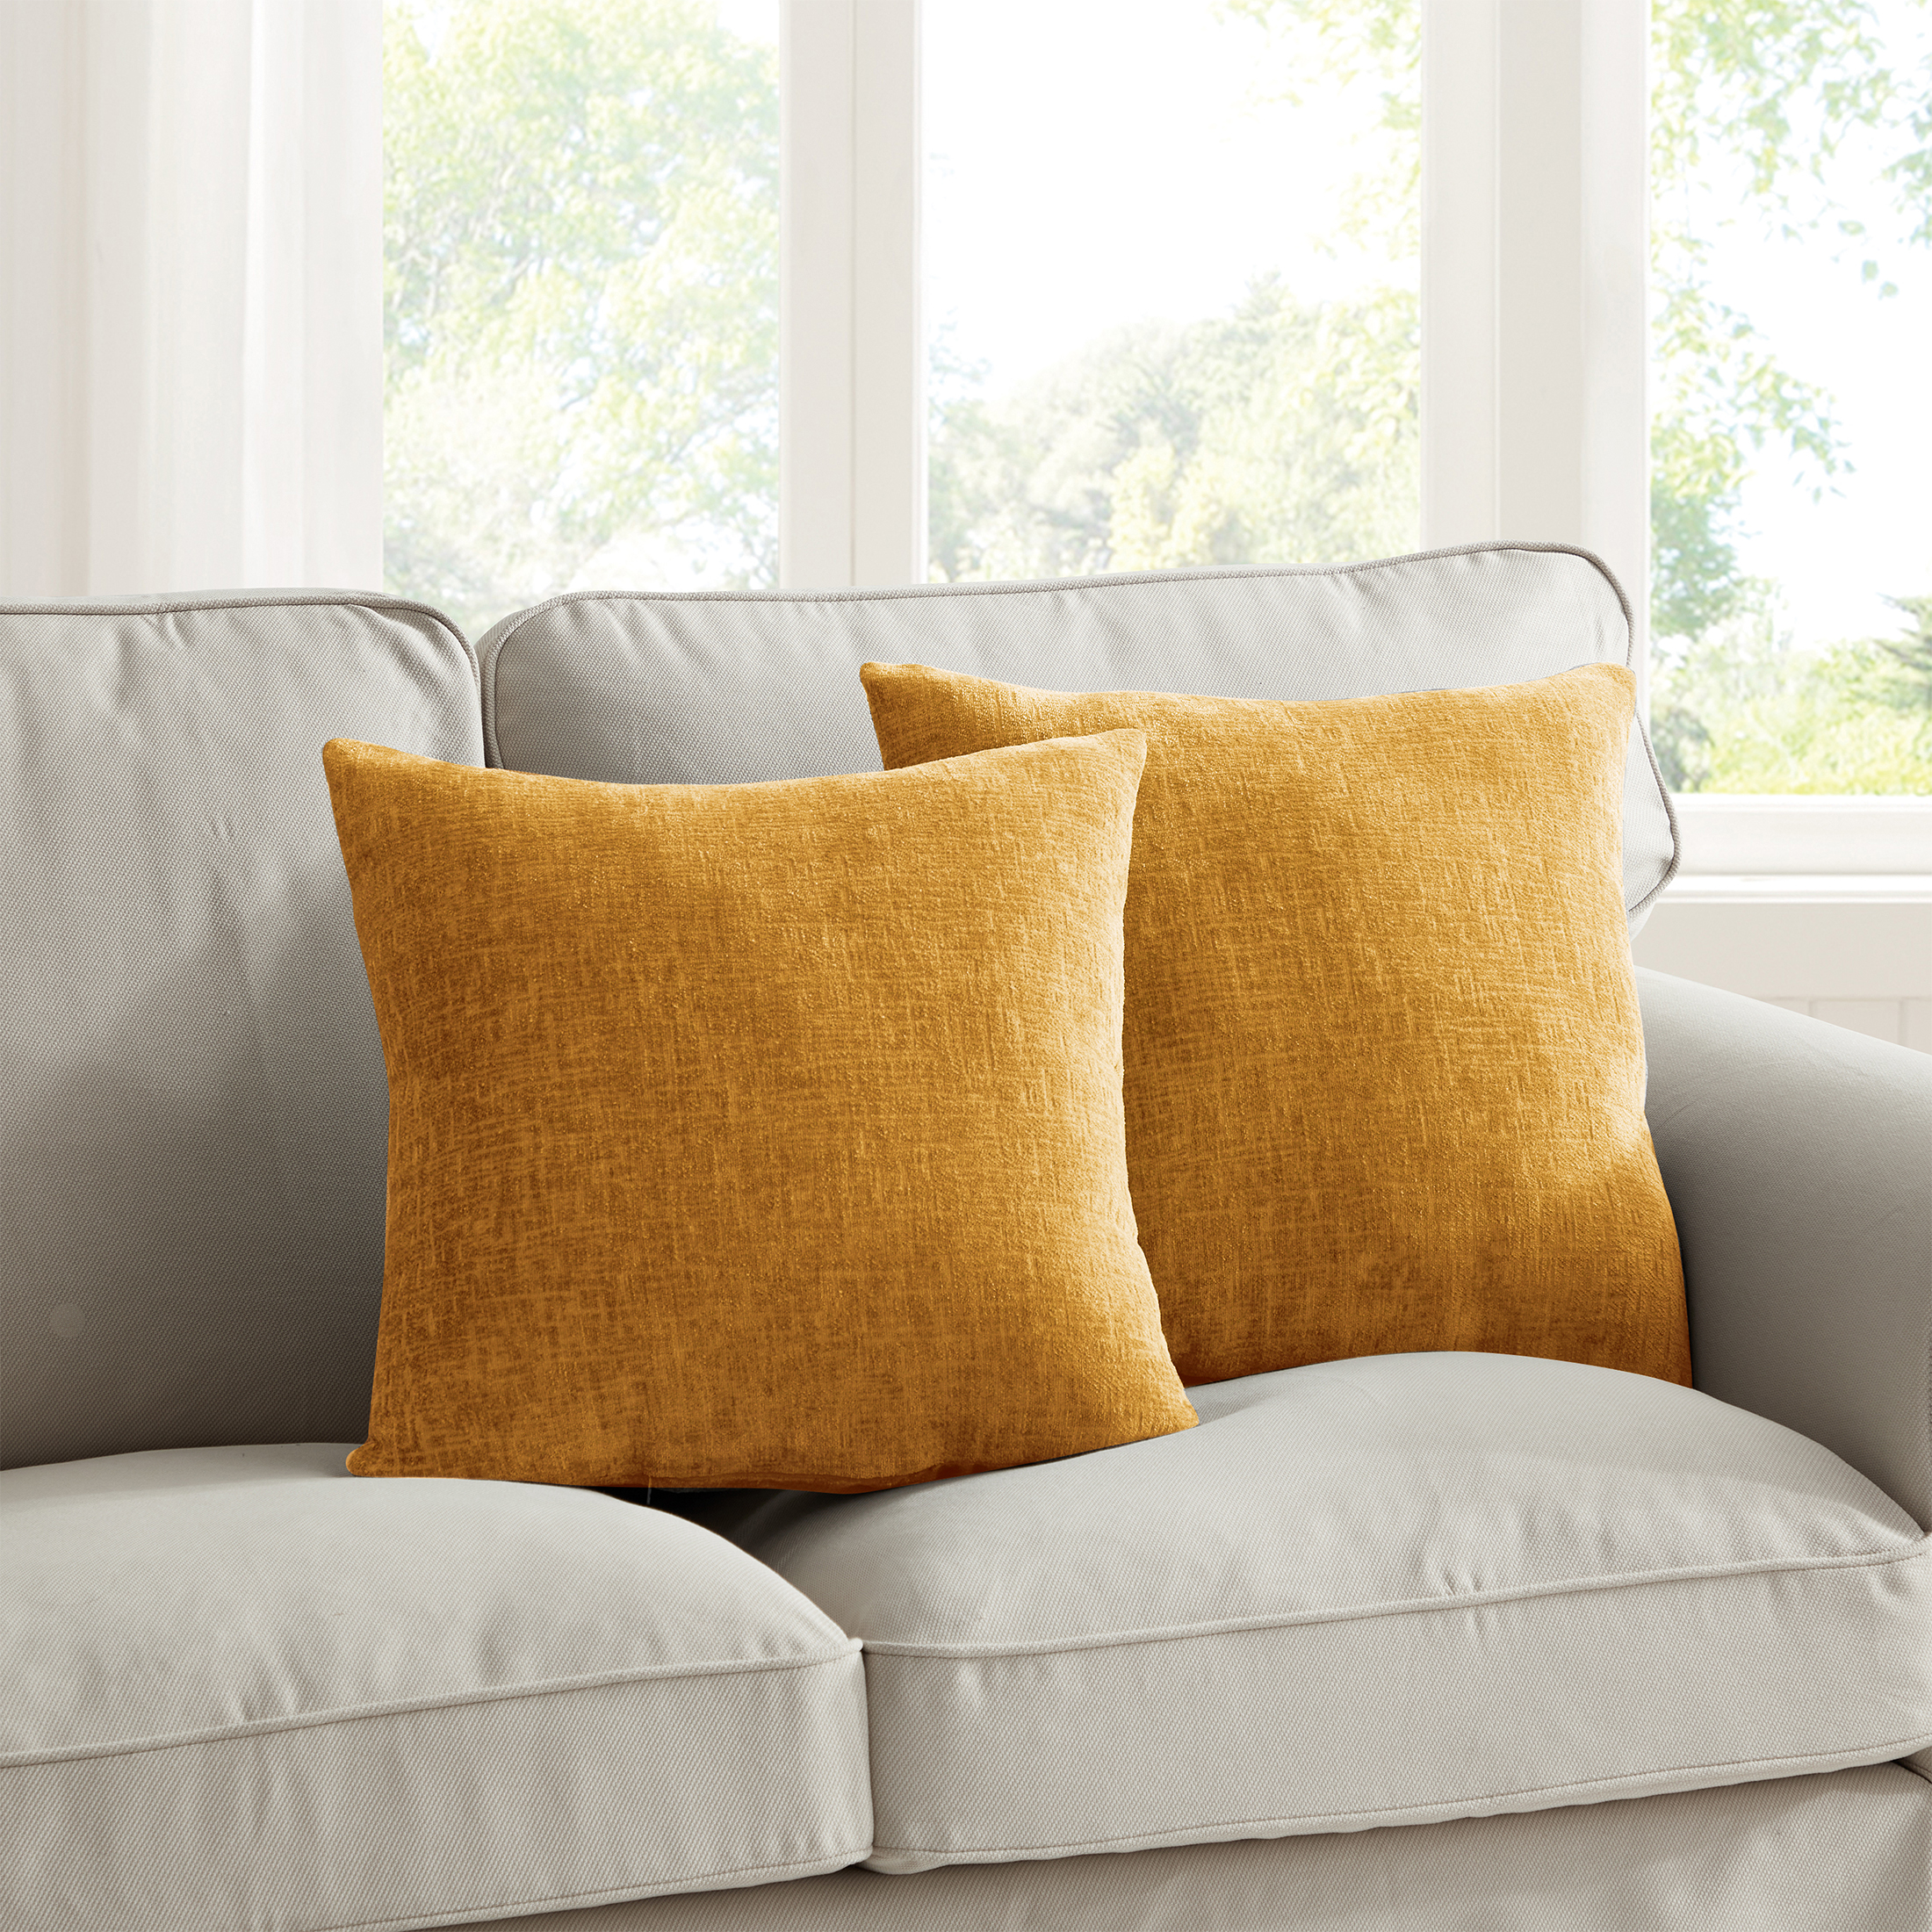 Mainstays Chenille 18" x 18" Gold Solid Polyester Decorative Pillows (2 Count) - image 1 of 5